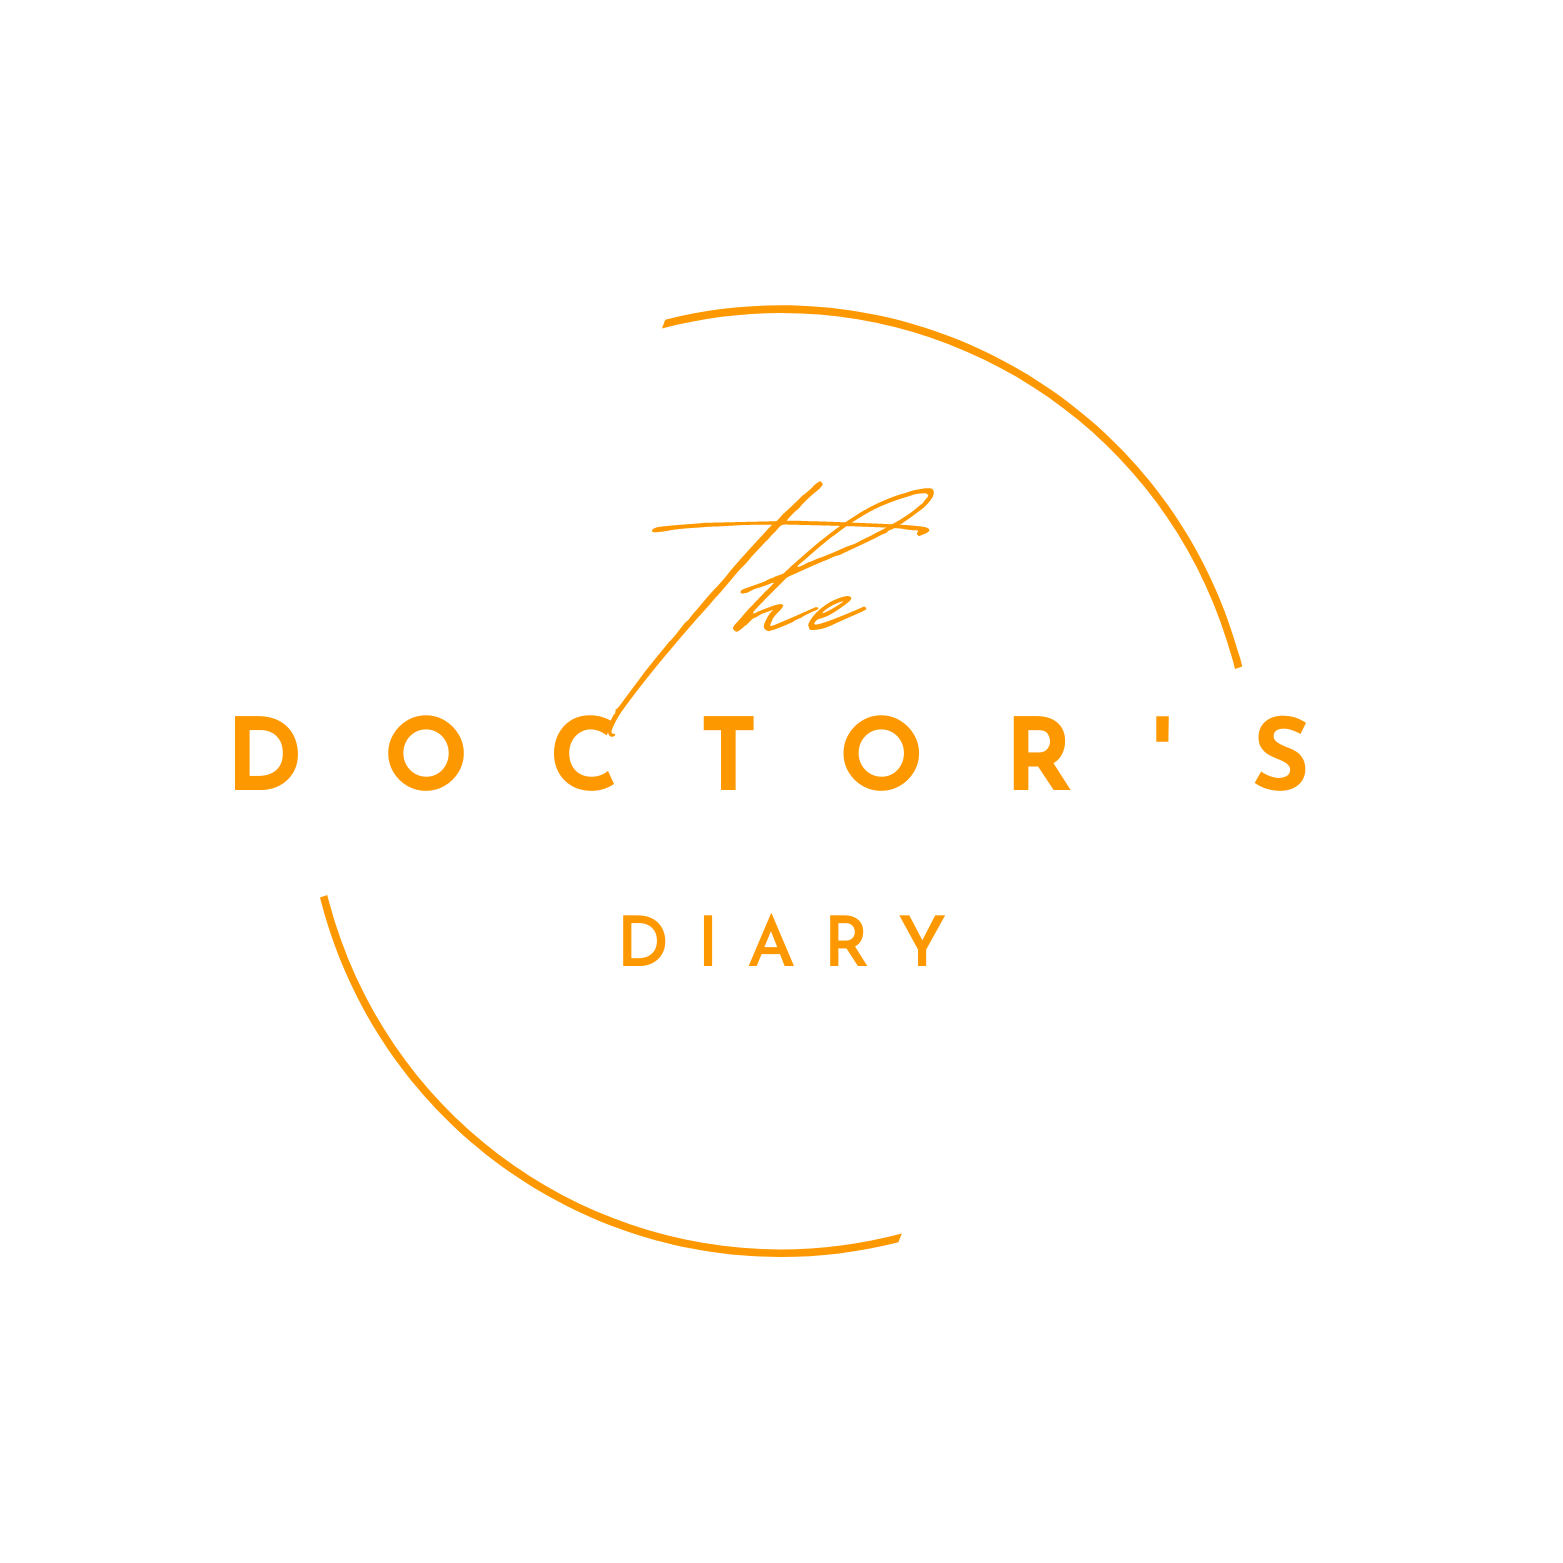 THE DOCTOR'S DIARY